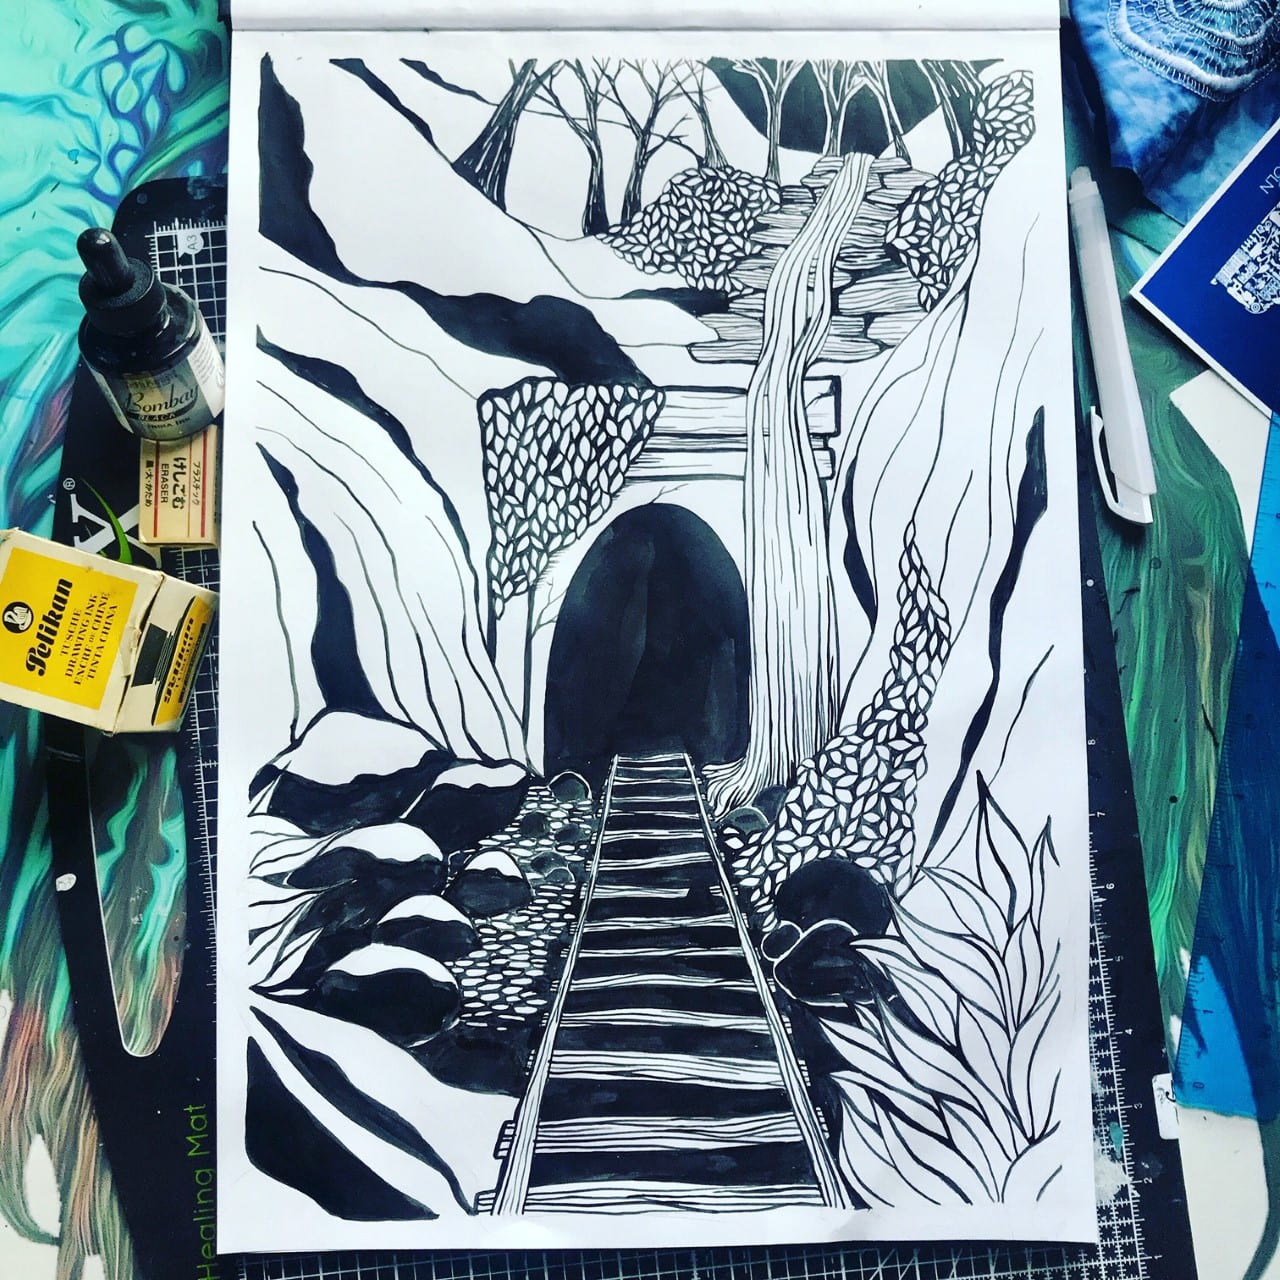 Photograph of a Lino Print of an Abandoned Train Tunnel surrounded by art equipment.